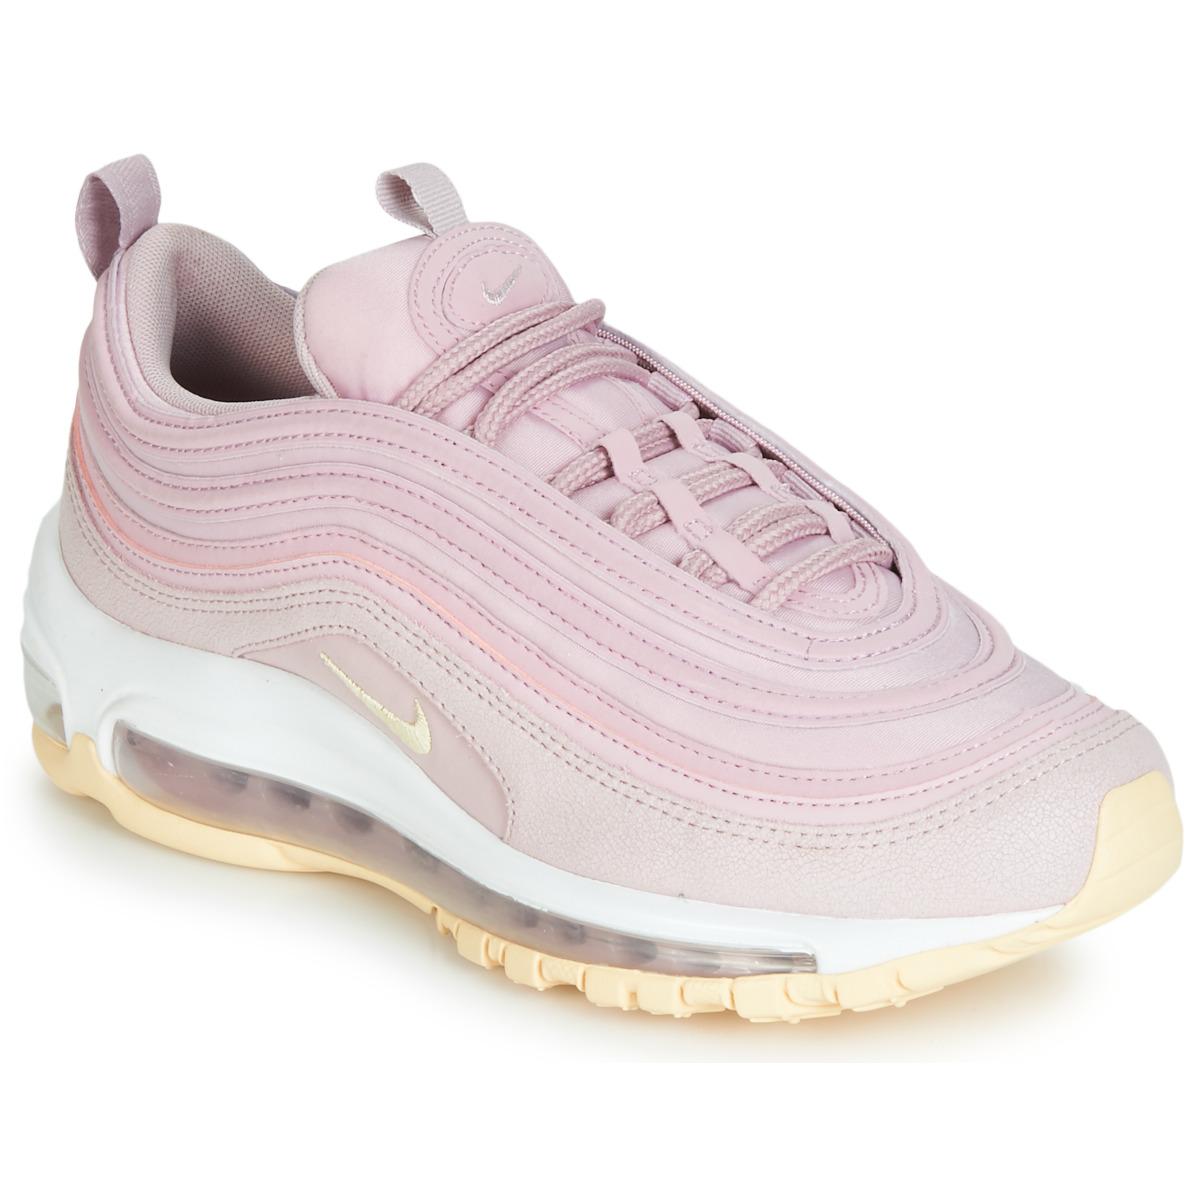 Nike Leather Women's Air Max '97 Premium in Lilac (Pink) - Lyst